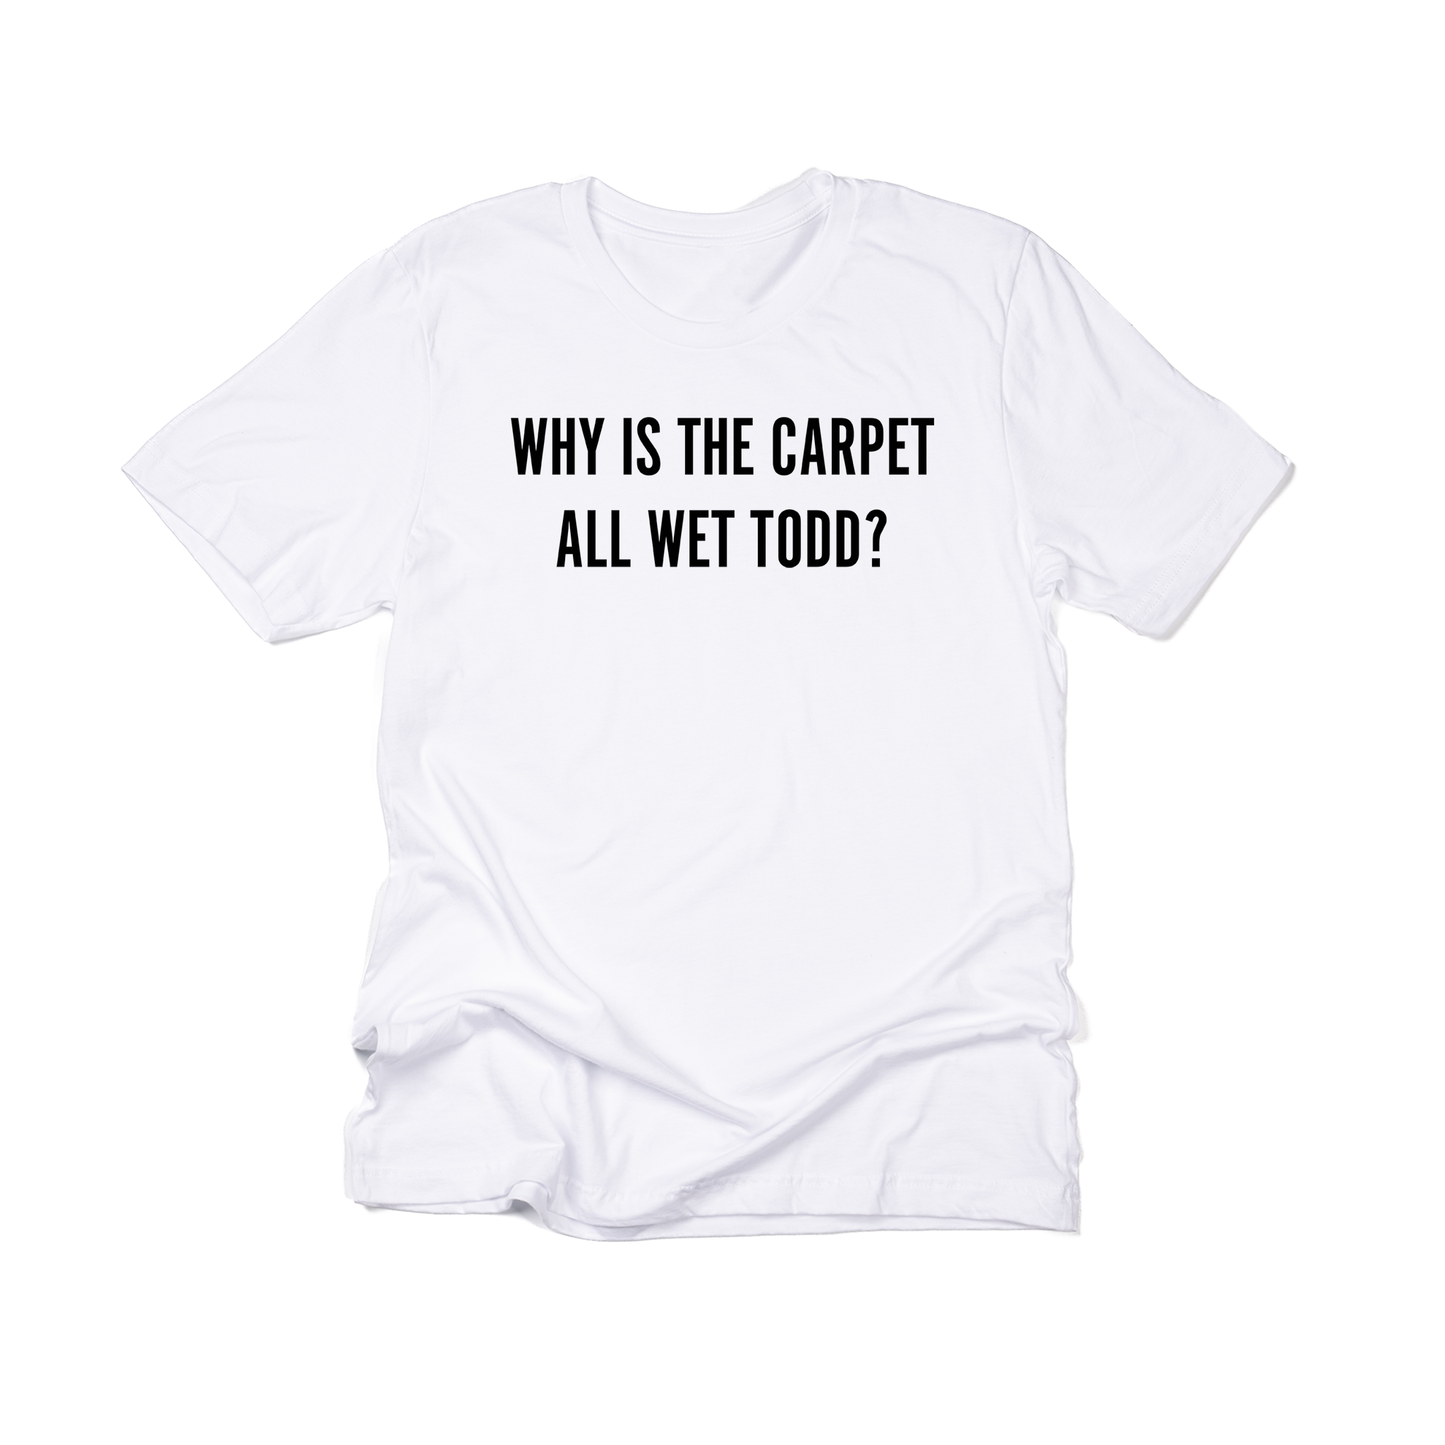 Why Is The Carpet All Wet Todd (Black) - Tee (White)